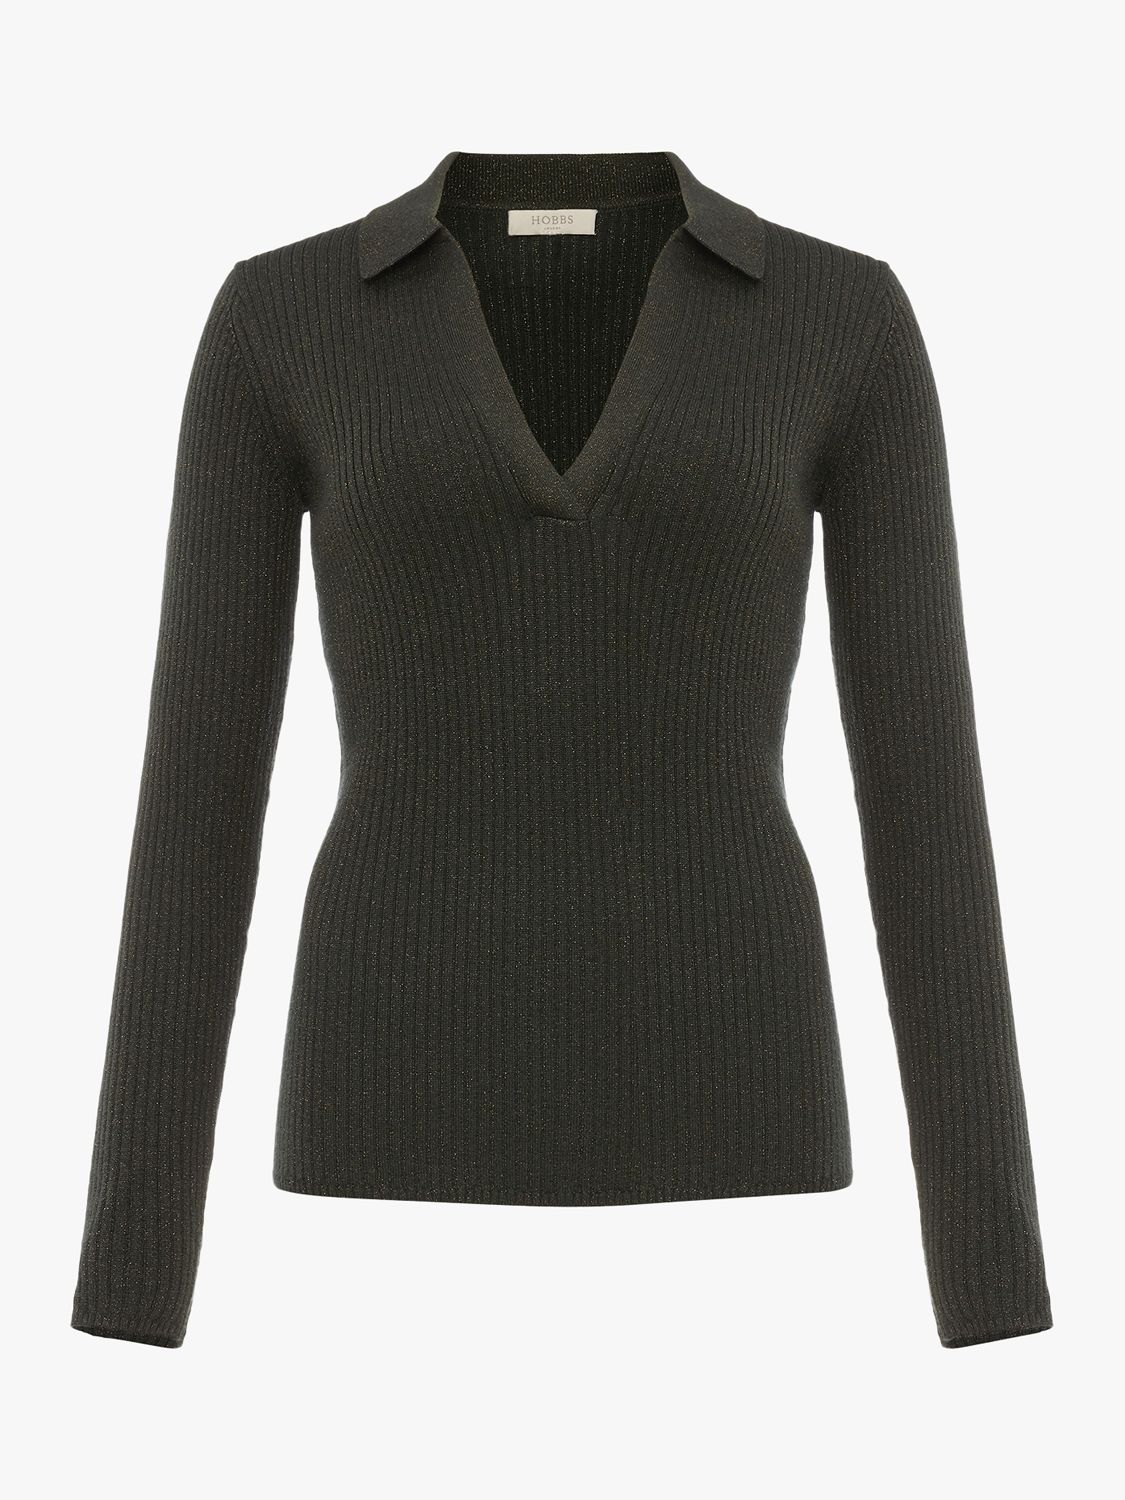 Hobbs Alexis Sparkle Knitted Jumper, Green/Gold at John Lewis & Partners